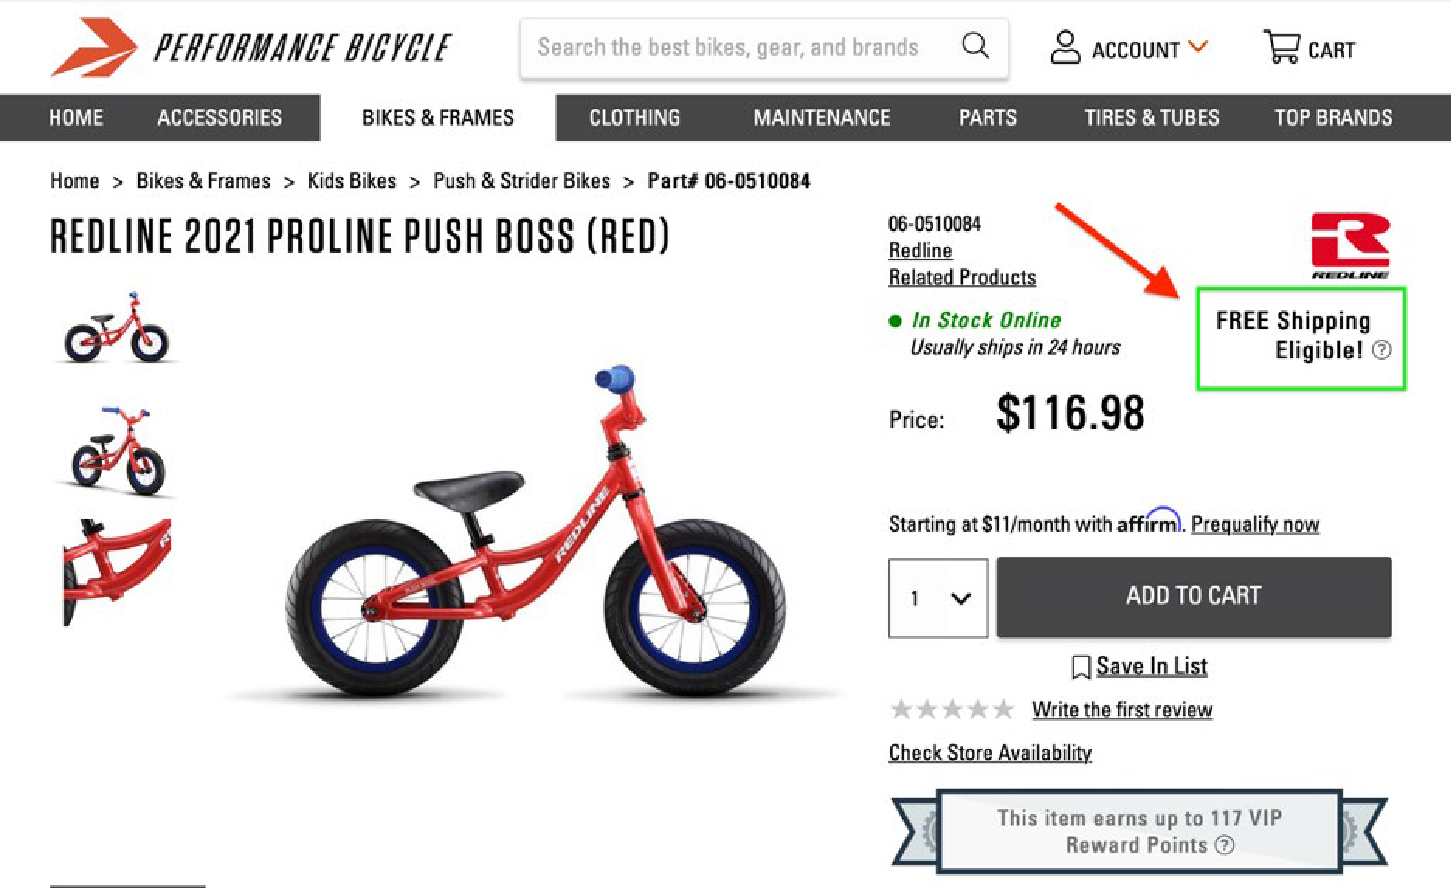 Free Shipping shown on a product